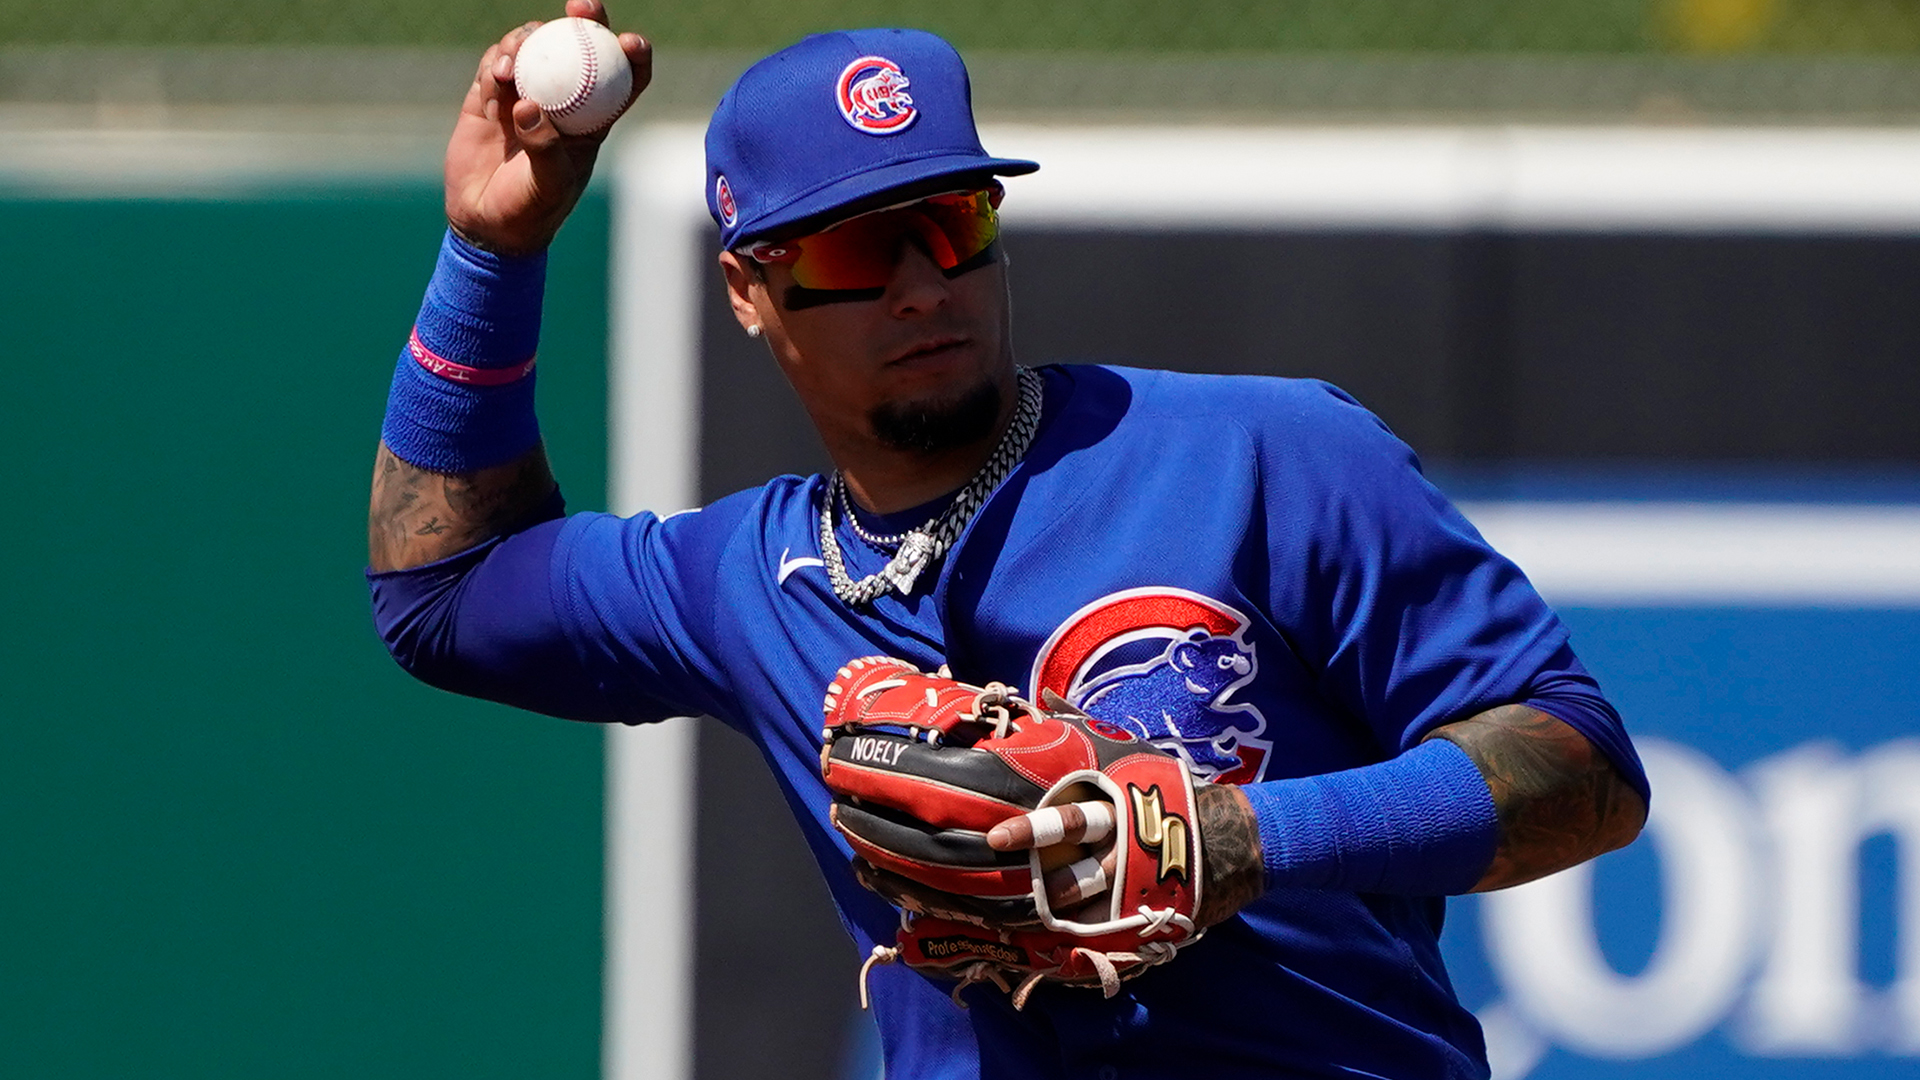 WATCH: Javy Baez on his 'El Mago' play of the year